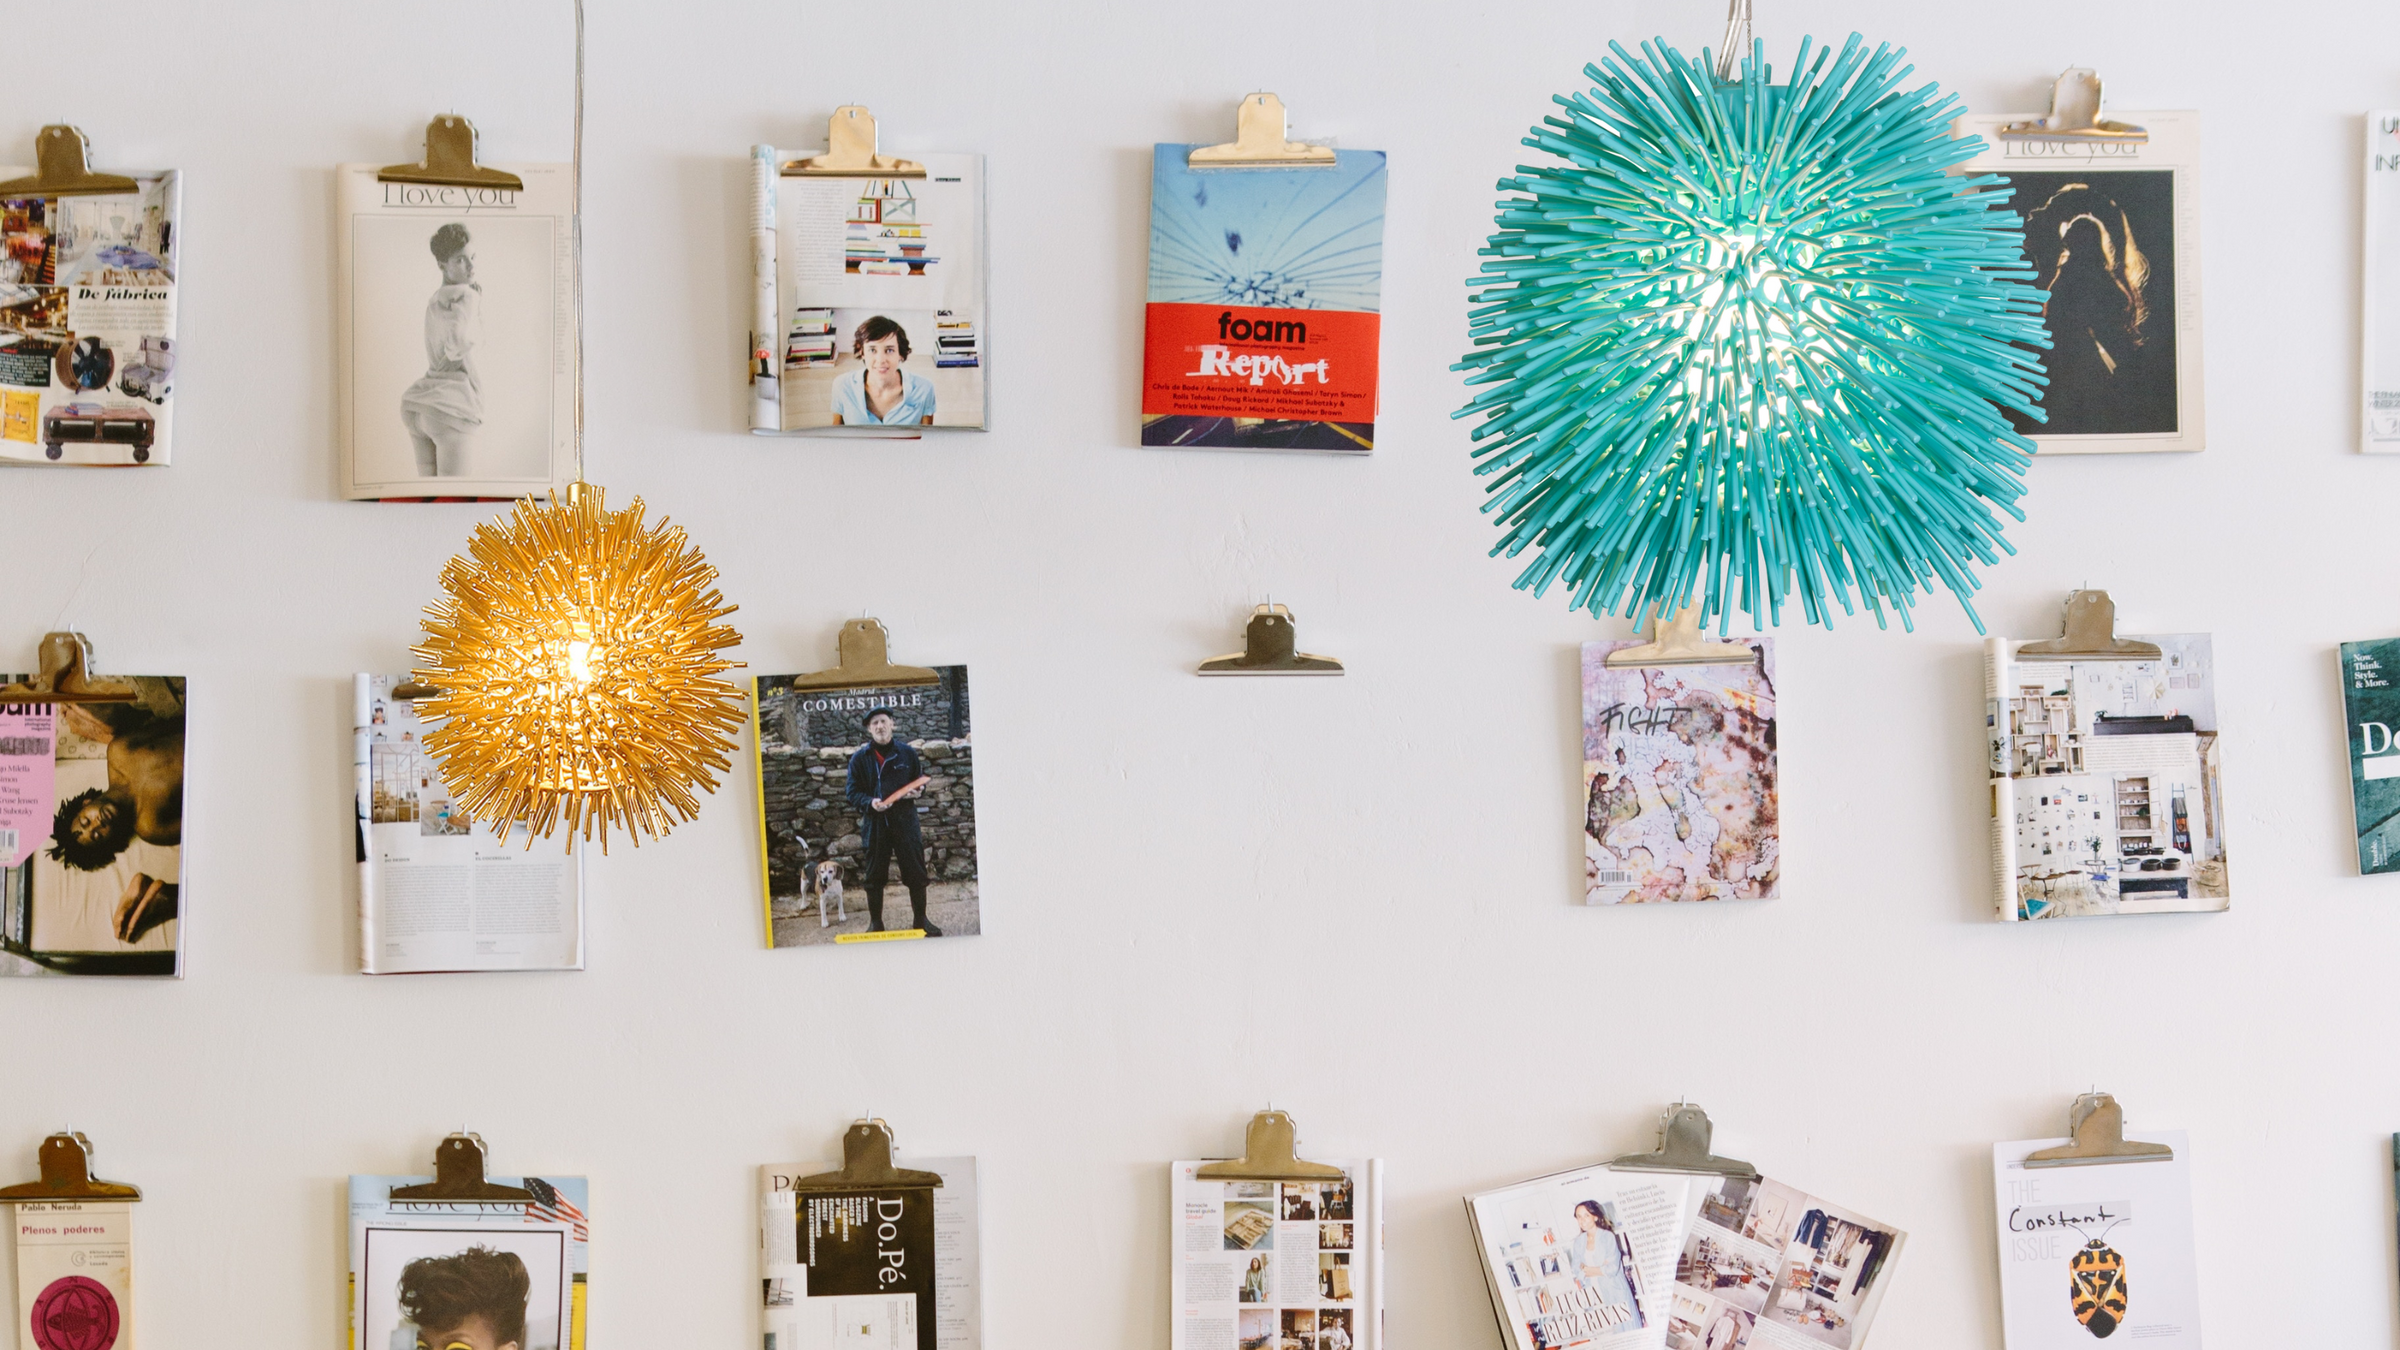 Colorful urchin pendants shown next to a wall hung with various publications and drawings